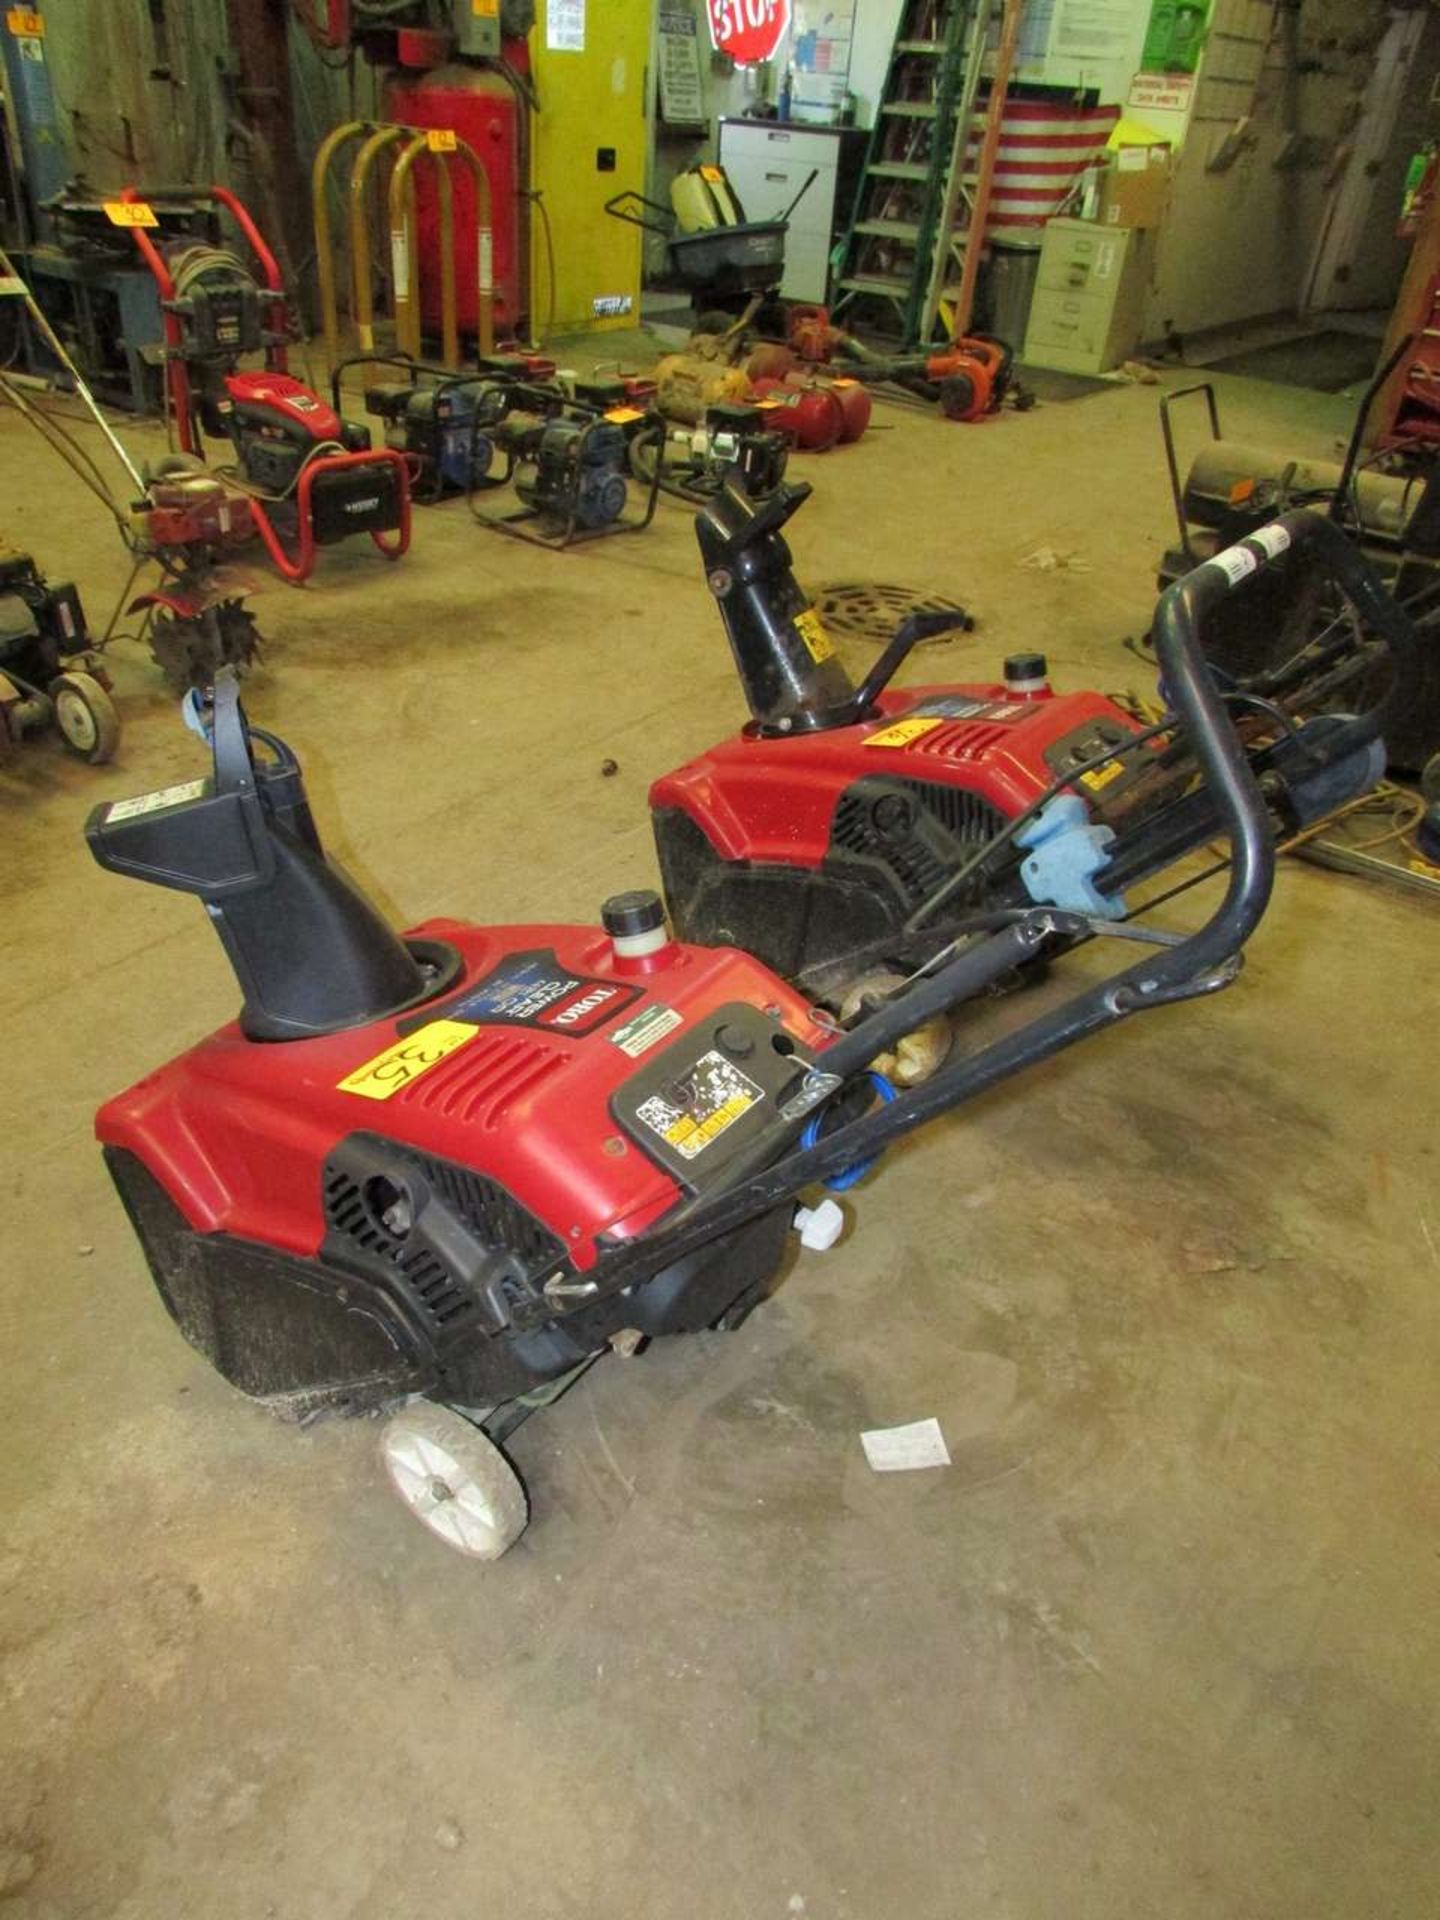 Toro Power Clear 421QR 21" Gas Powered Snow Blower - Image 6 of 6